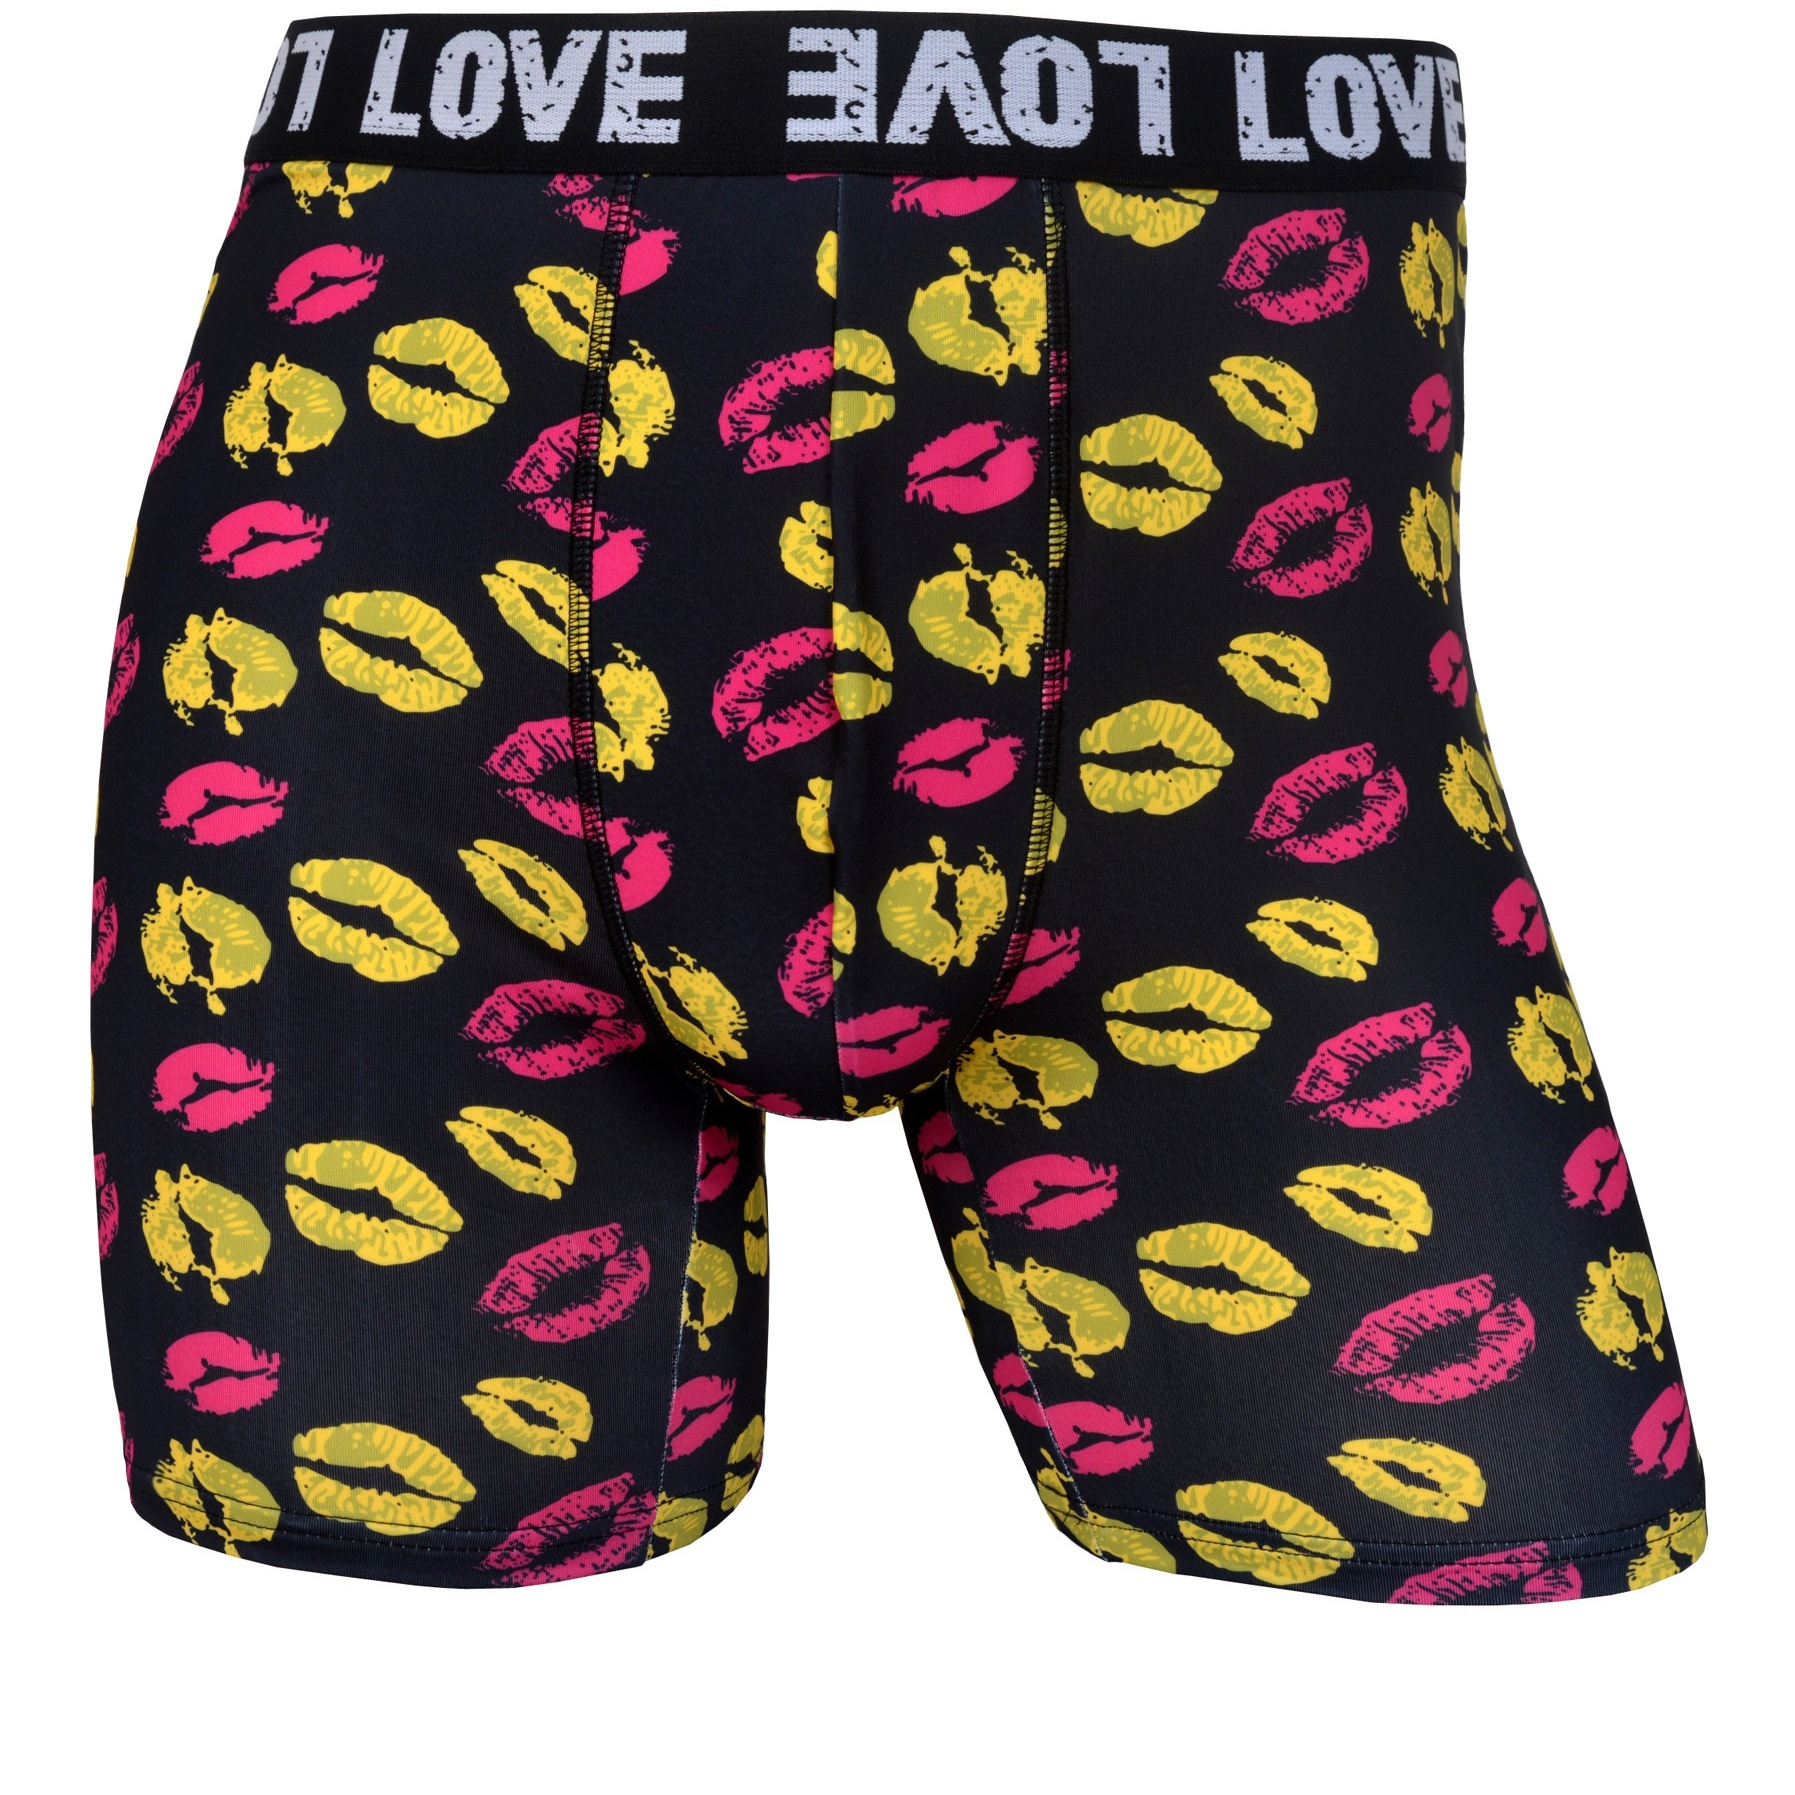 Men's Underwear, Heart Print Fashion Breathable Comfy High Stretch Boxer  Briefs Shorts, Swim Trunks For Beach Pool, Valentine's Day Gifts